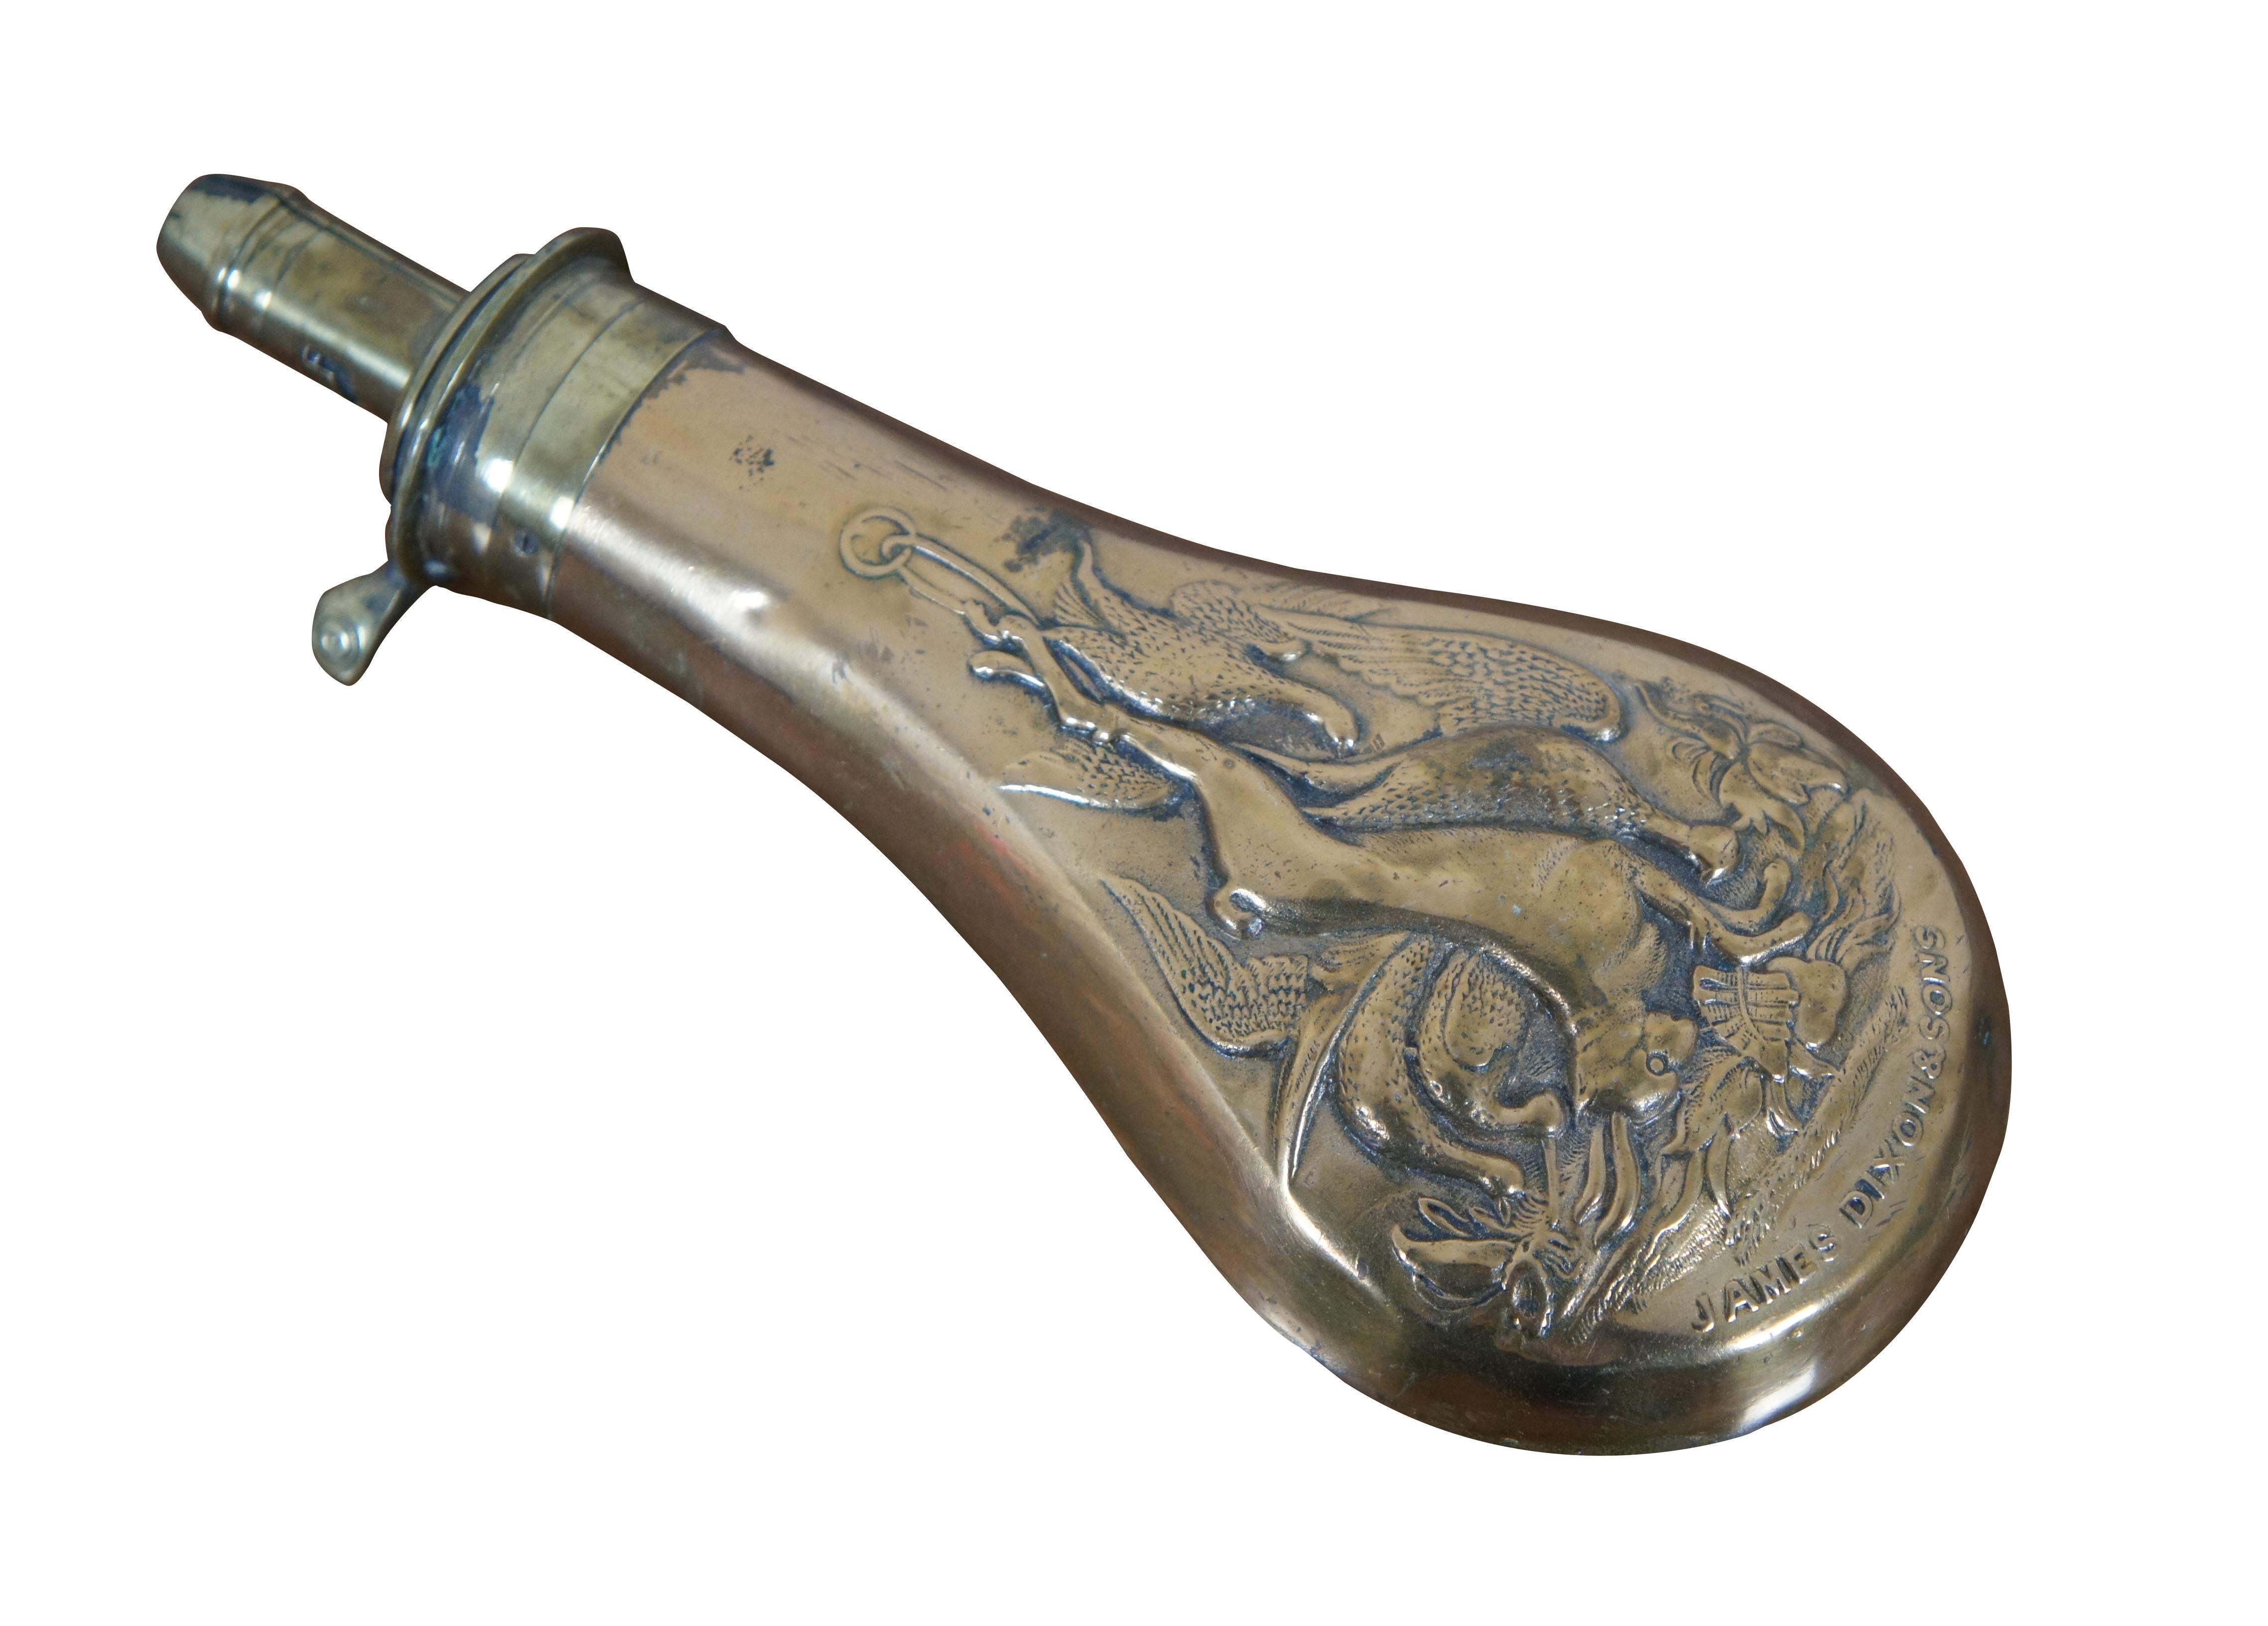 Antique English circa 1850’s copper and brass powder flask horn by James Dixon & Sons, featuring a molded motif of hanging game (rabbin / pheasant / duck / birds) and an adjustable dram measure at the top indicating 2, 2 ¼ and 2 ½